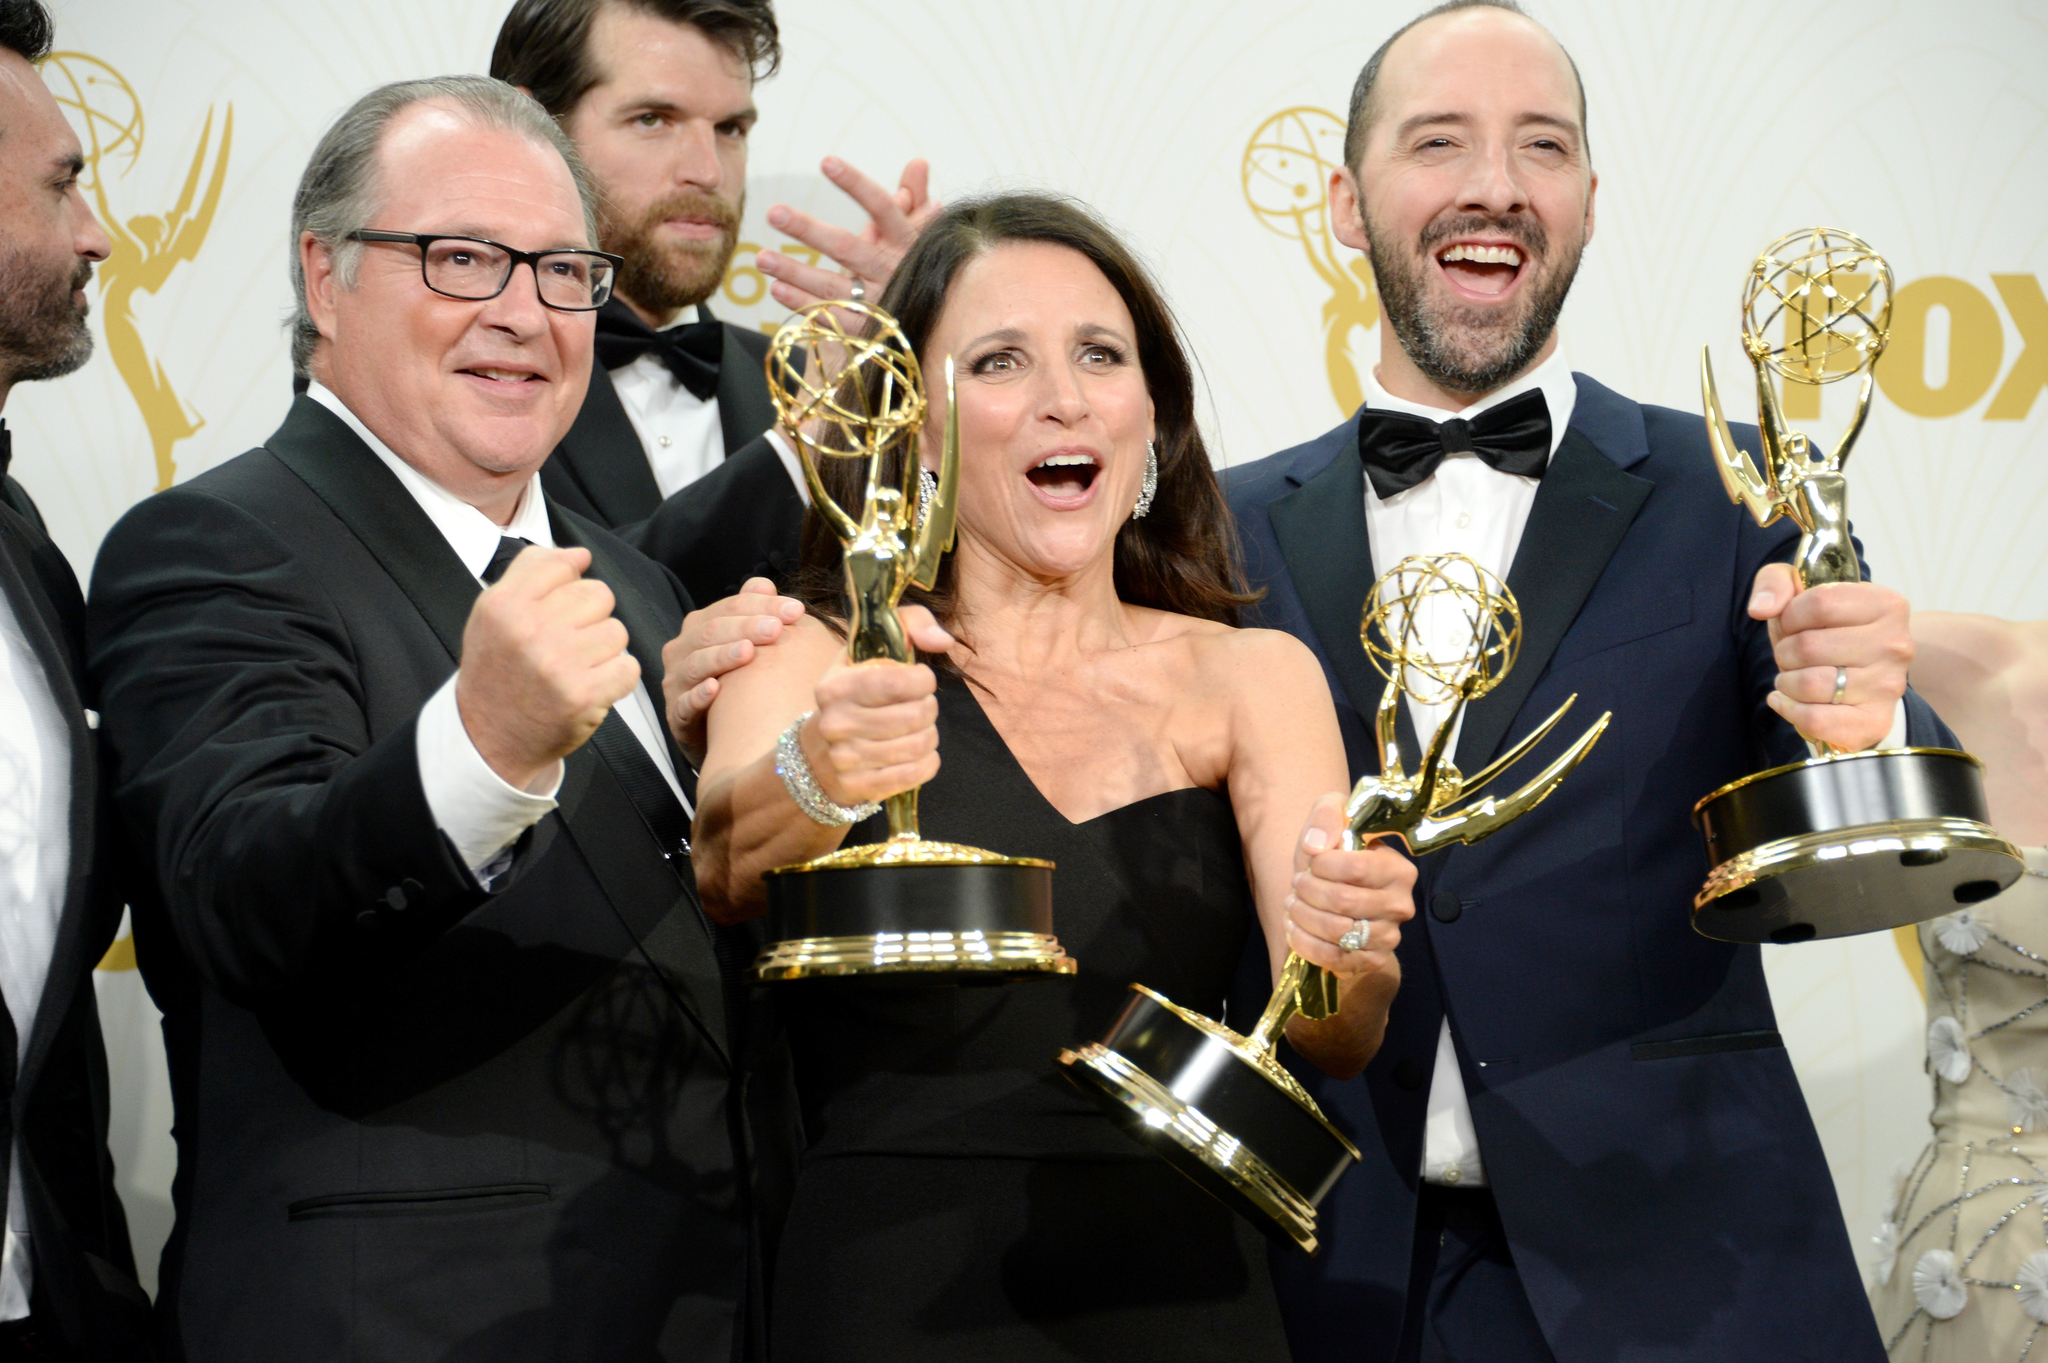 Julia Louis-Dreyfus, Kevin Dunn, Tony Hale and Timothy Simons at event of The 67th Primetime Emmy Awards (2015)